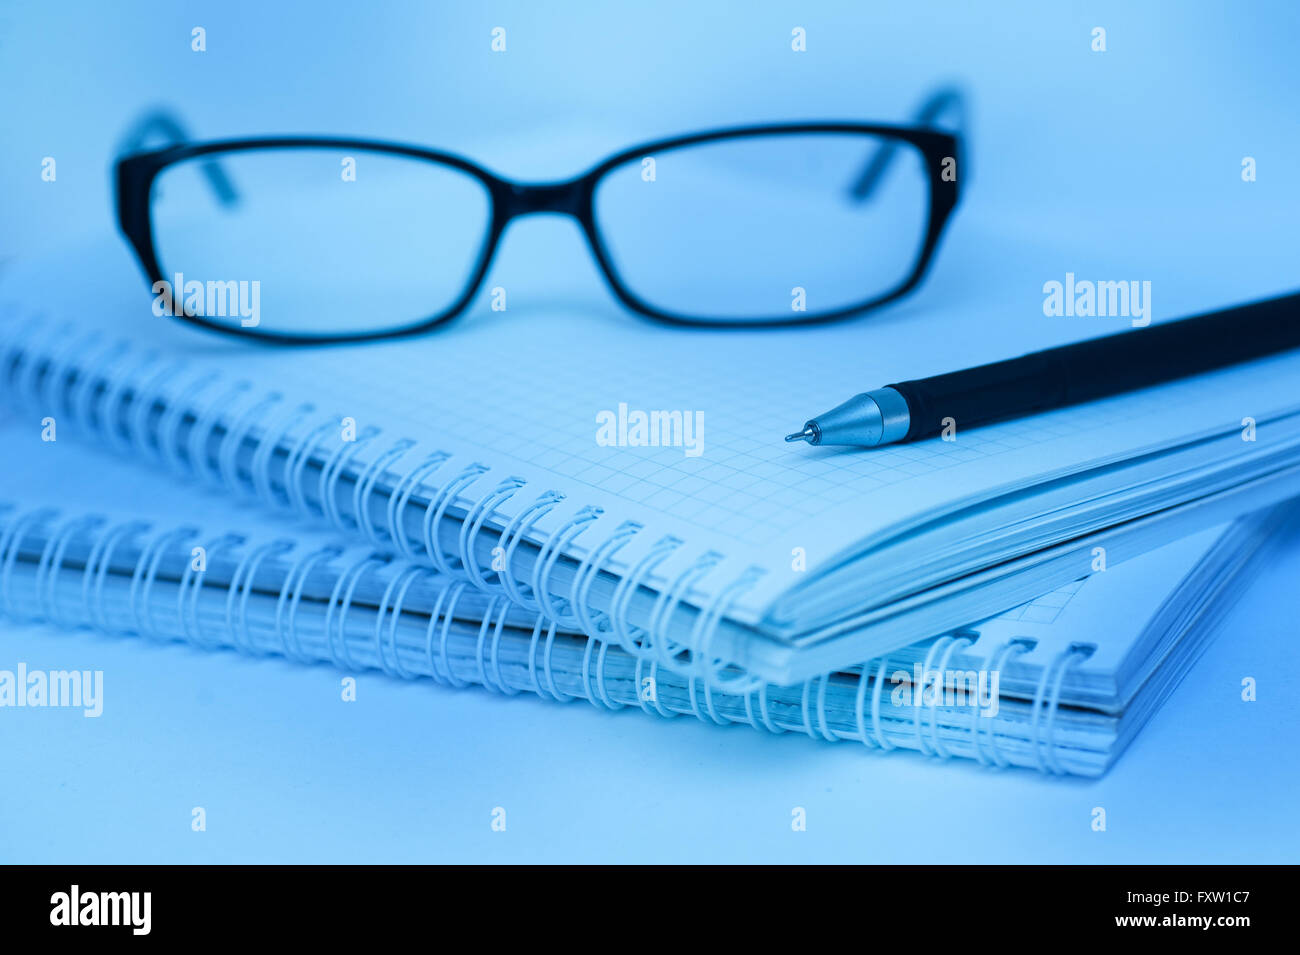 black pen and glasses lying on notebook close up blue color Stock Photo